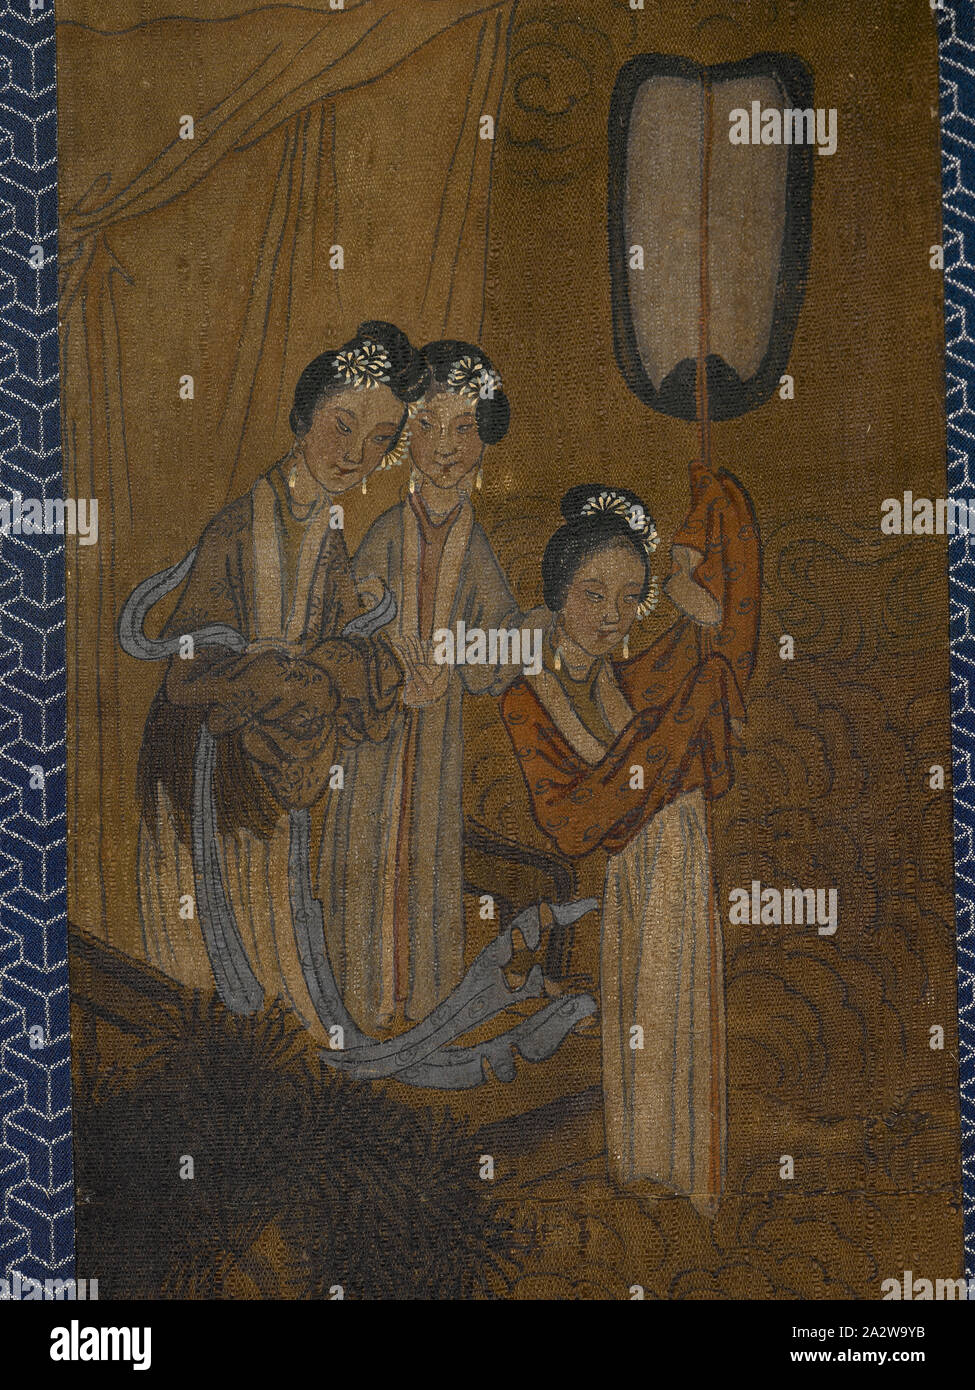 Five Women in a Procession, Unknown, ink and color on silk, 19-1/16 x 5 in. (image) 45 x 9 in. (installedl), Asian Art Stock Photo